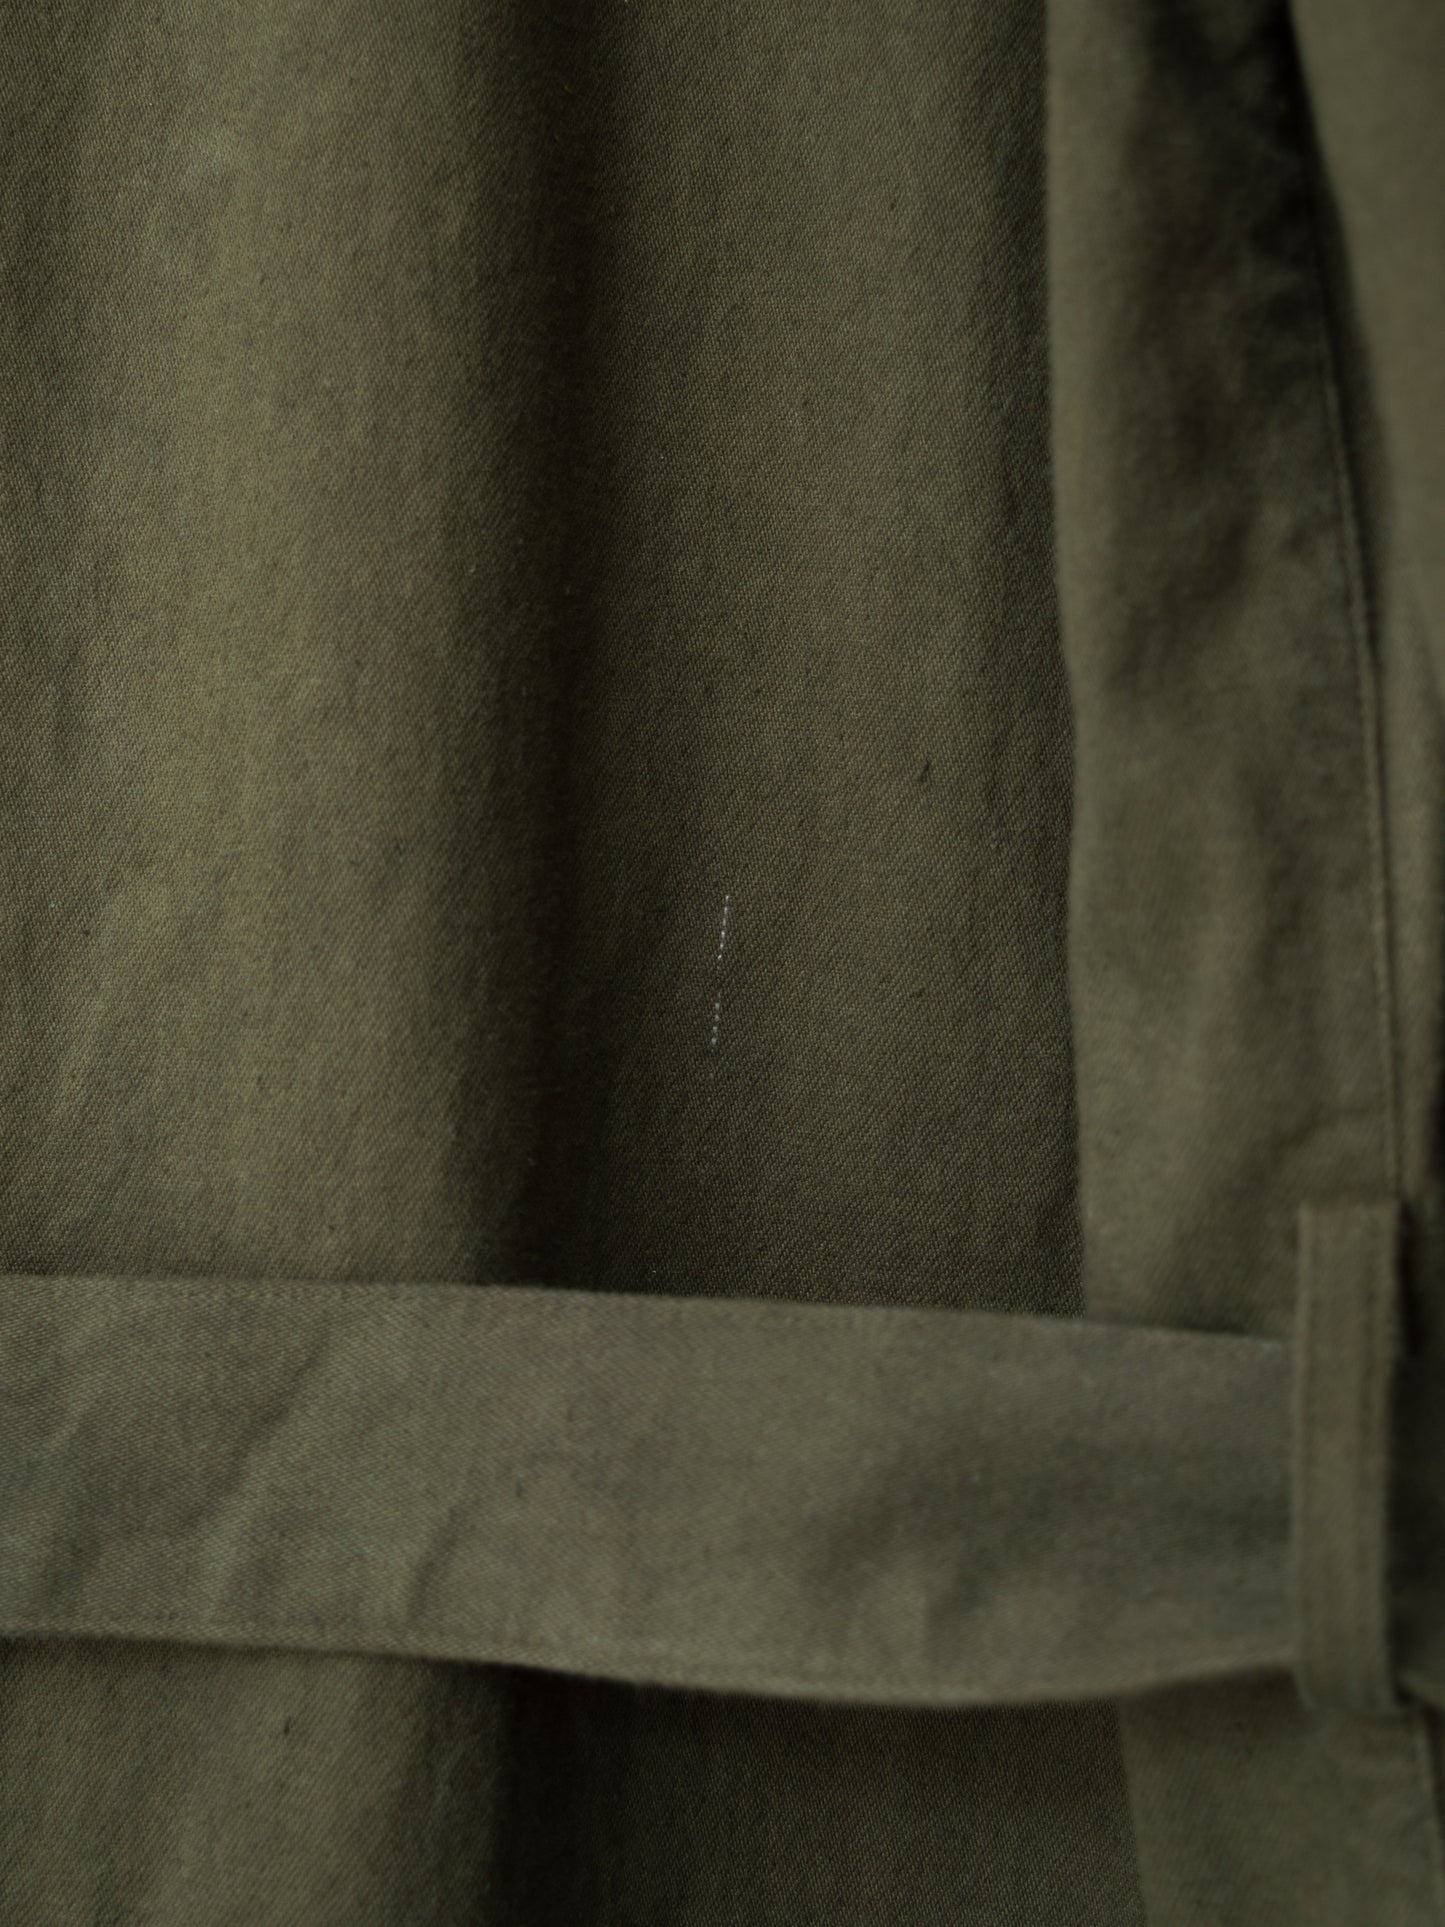 a/w 03 garment dyed motorcycle coat olive drab ∙ cotton ∙ large